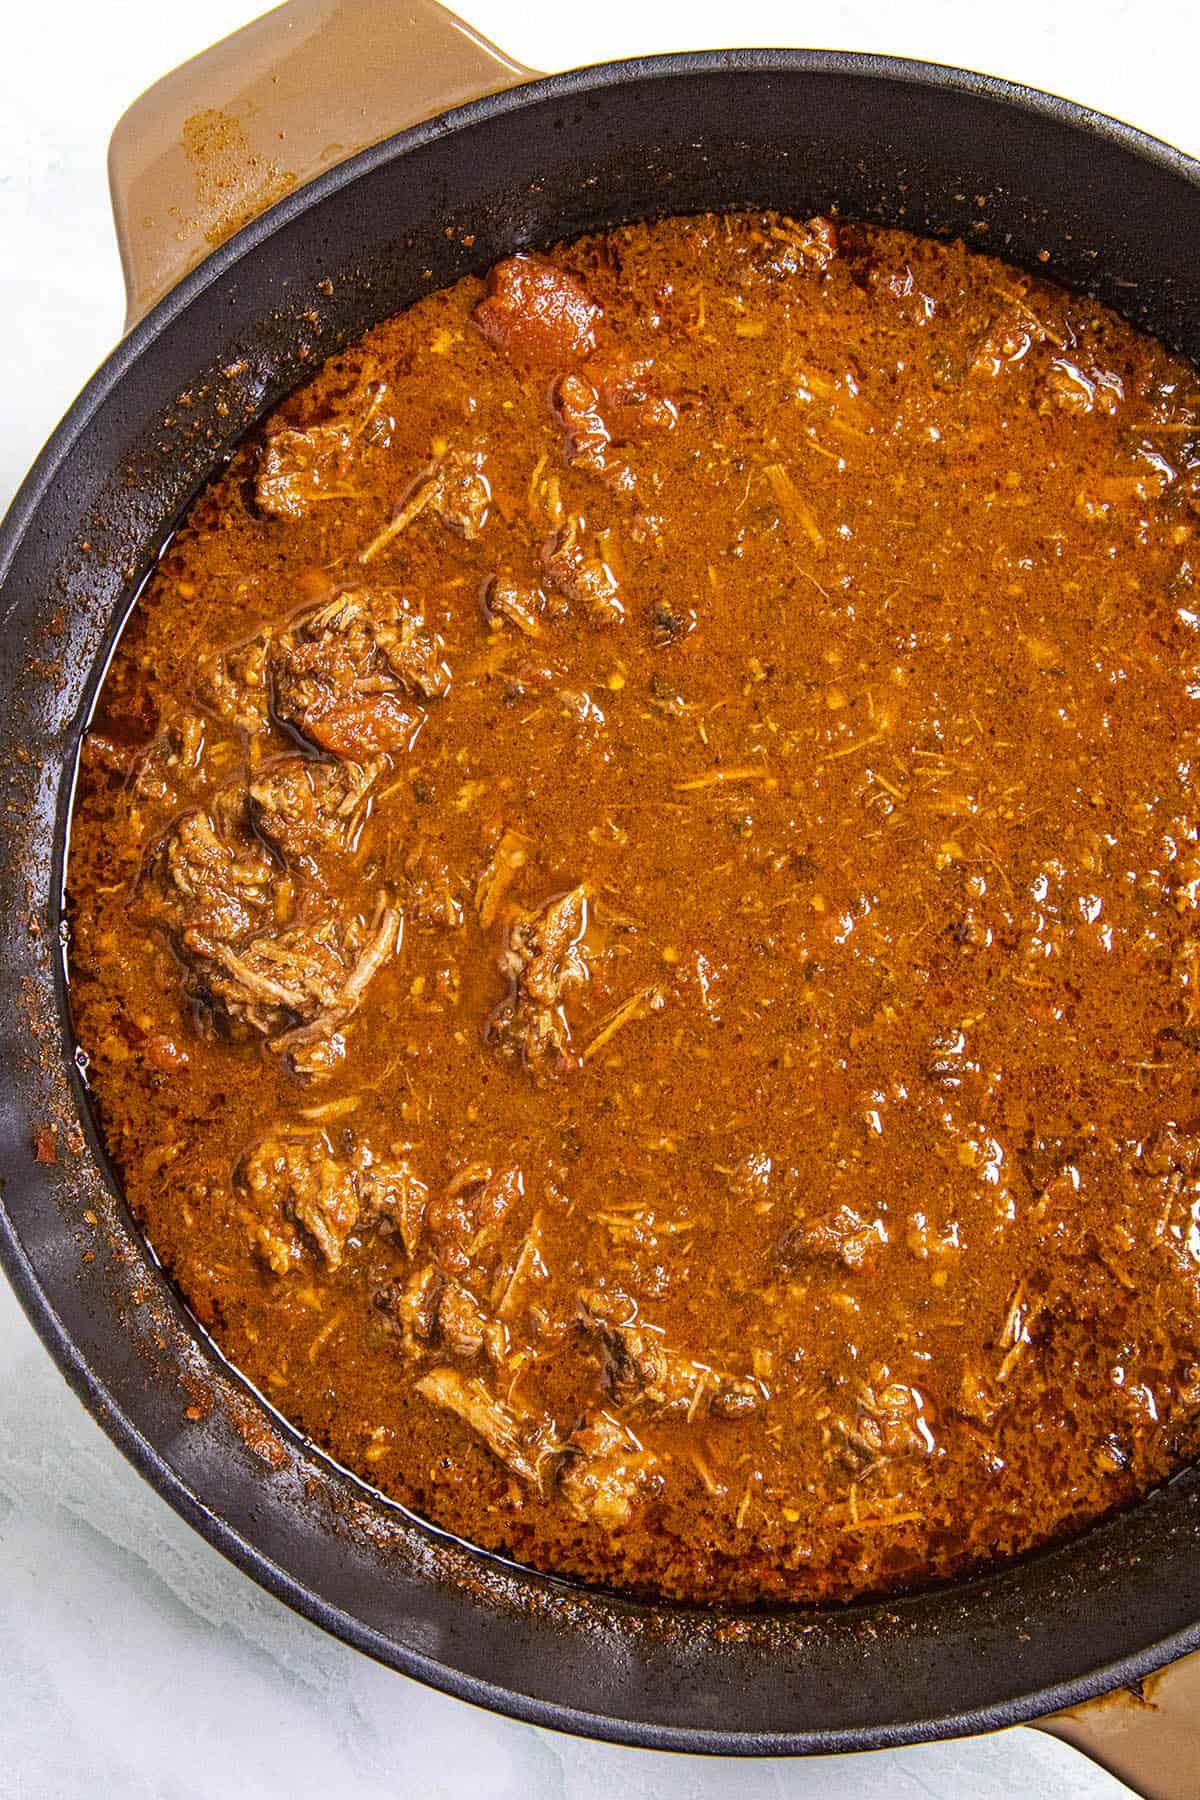 Simmering the Mexican Birria in a large pot